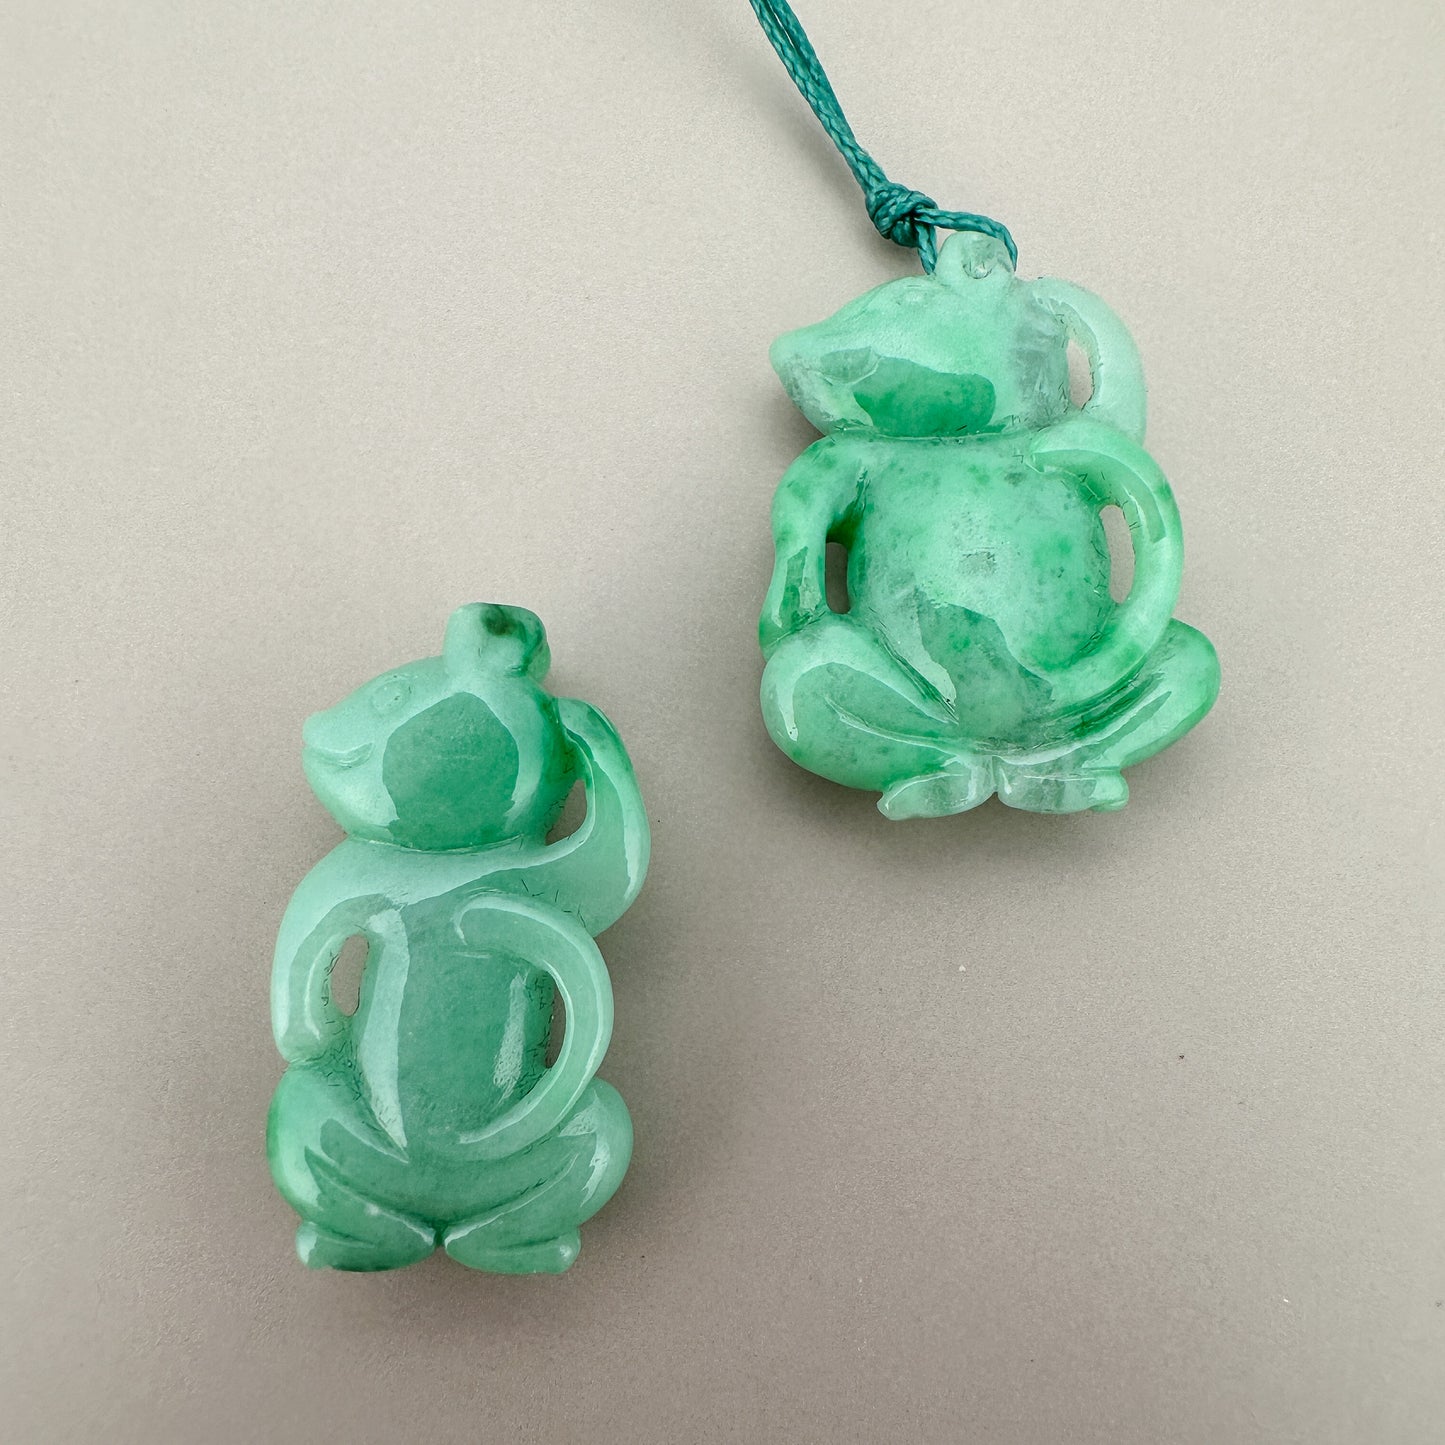 Green Jade Mouse/Rat 13x24mm Carved Pendant - 1 pc. (P2942)